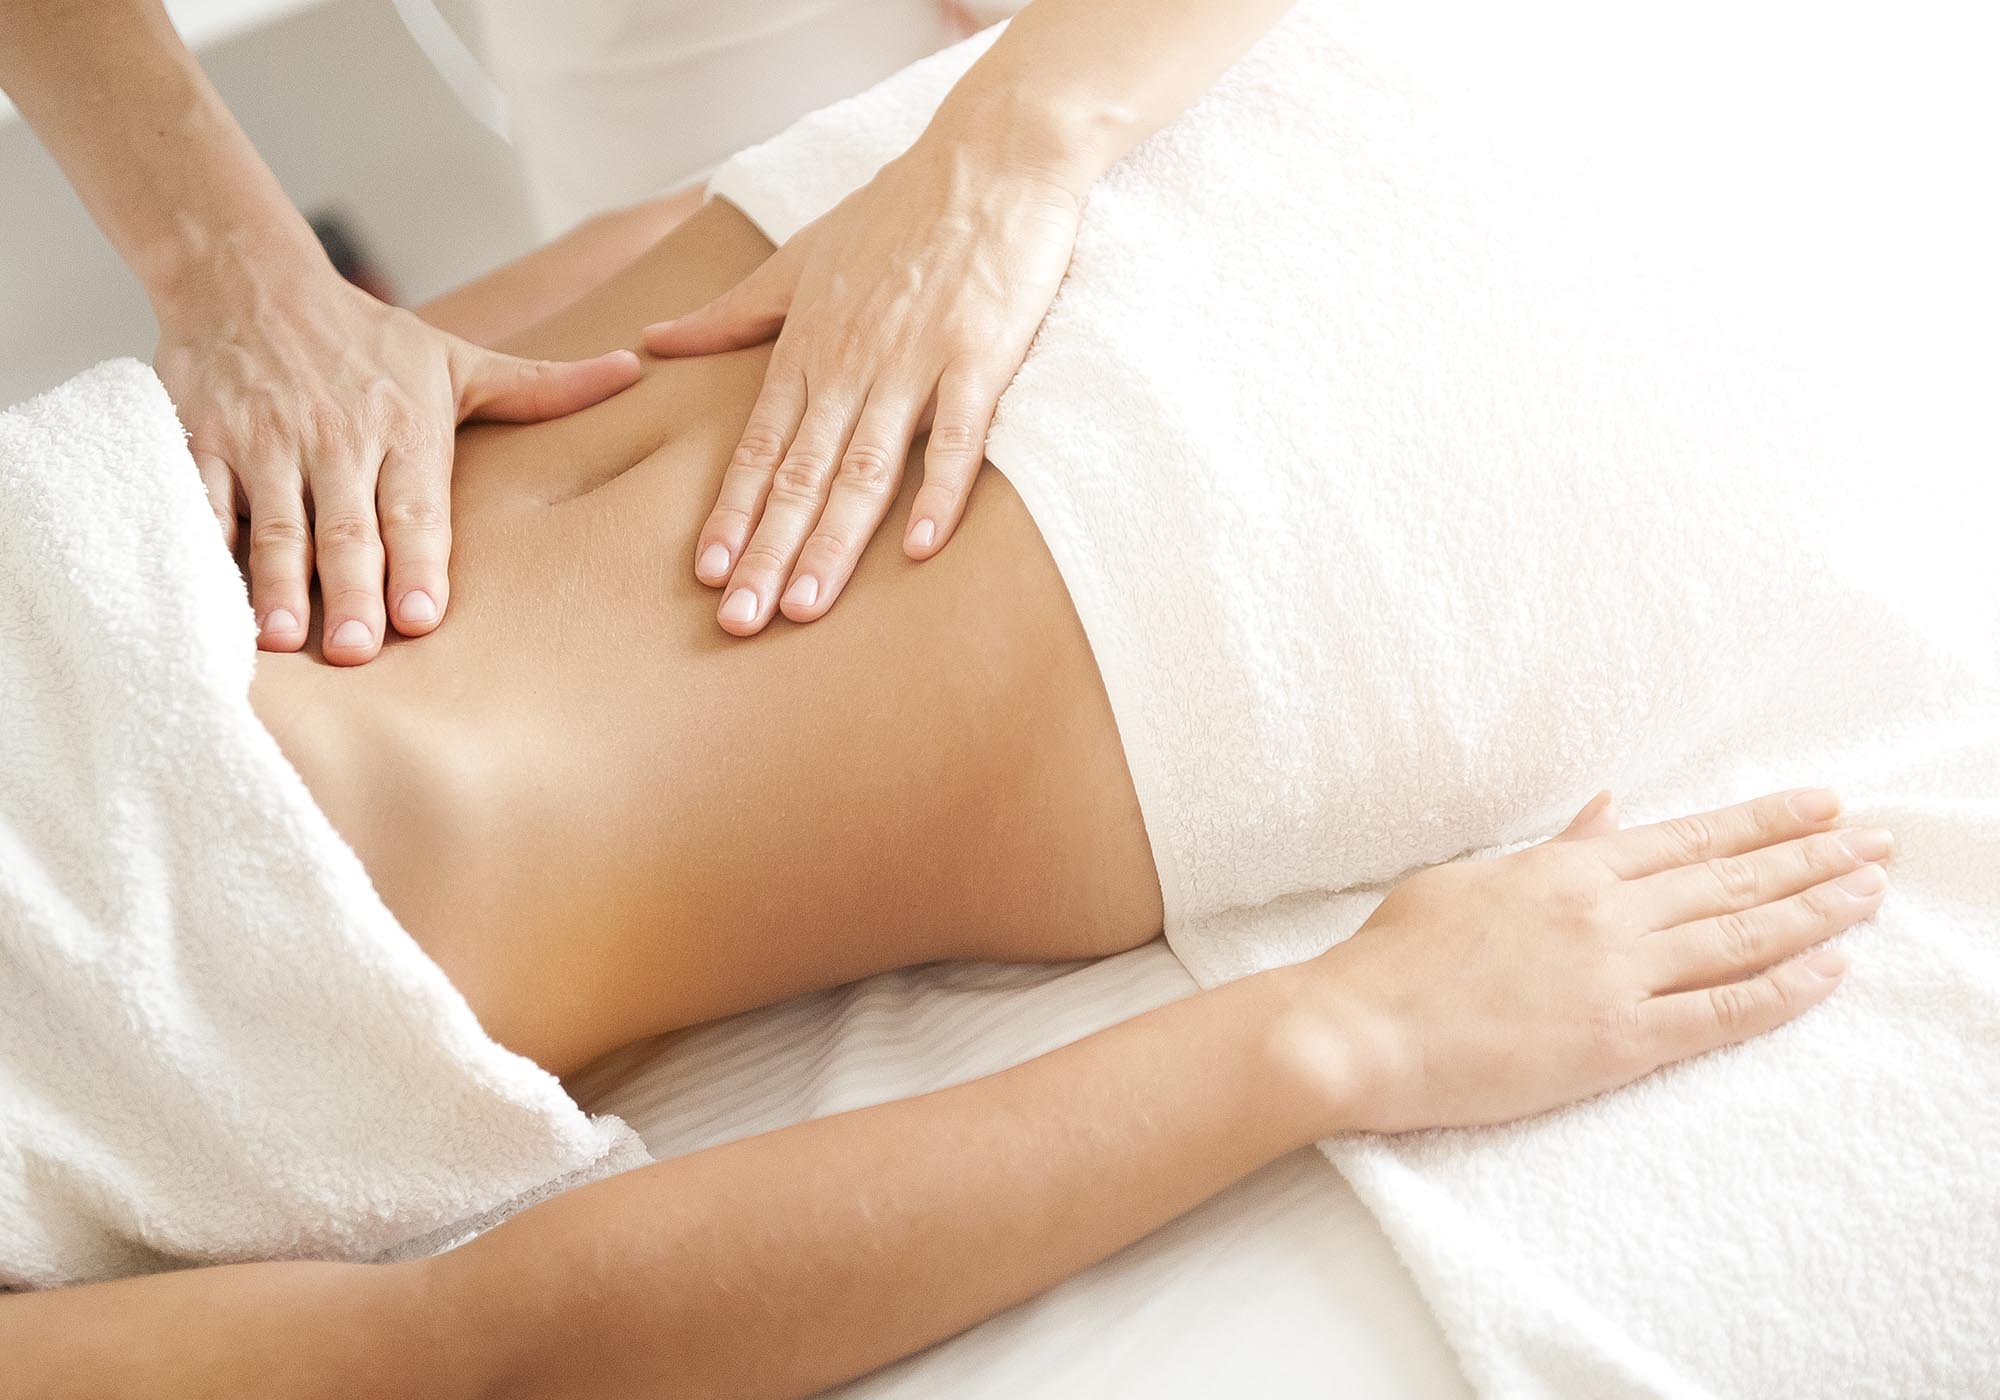 Here’s what you need to know about lymphatic massages, how they differ from traditional massages, how many treatments you’ll need, and more.